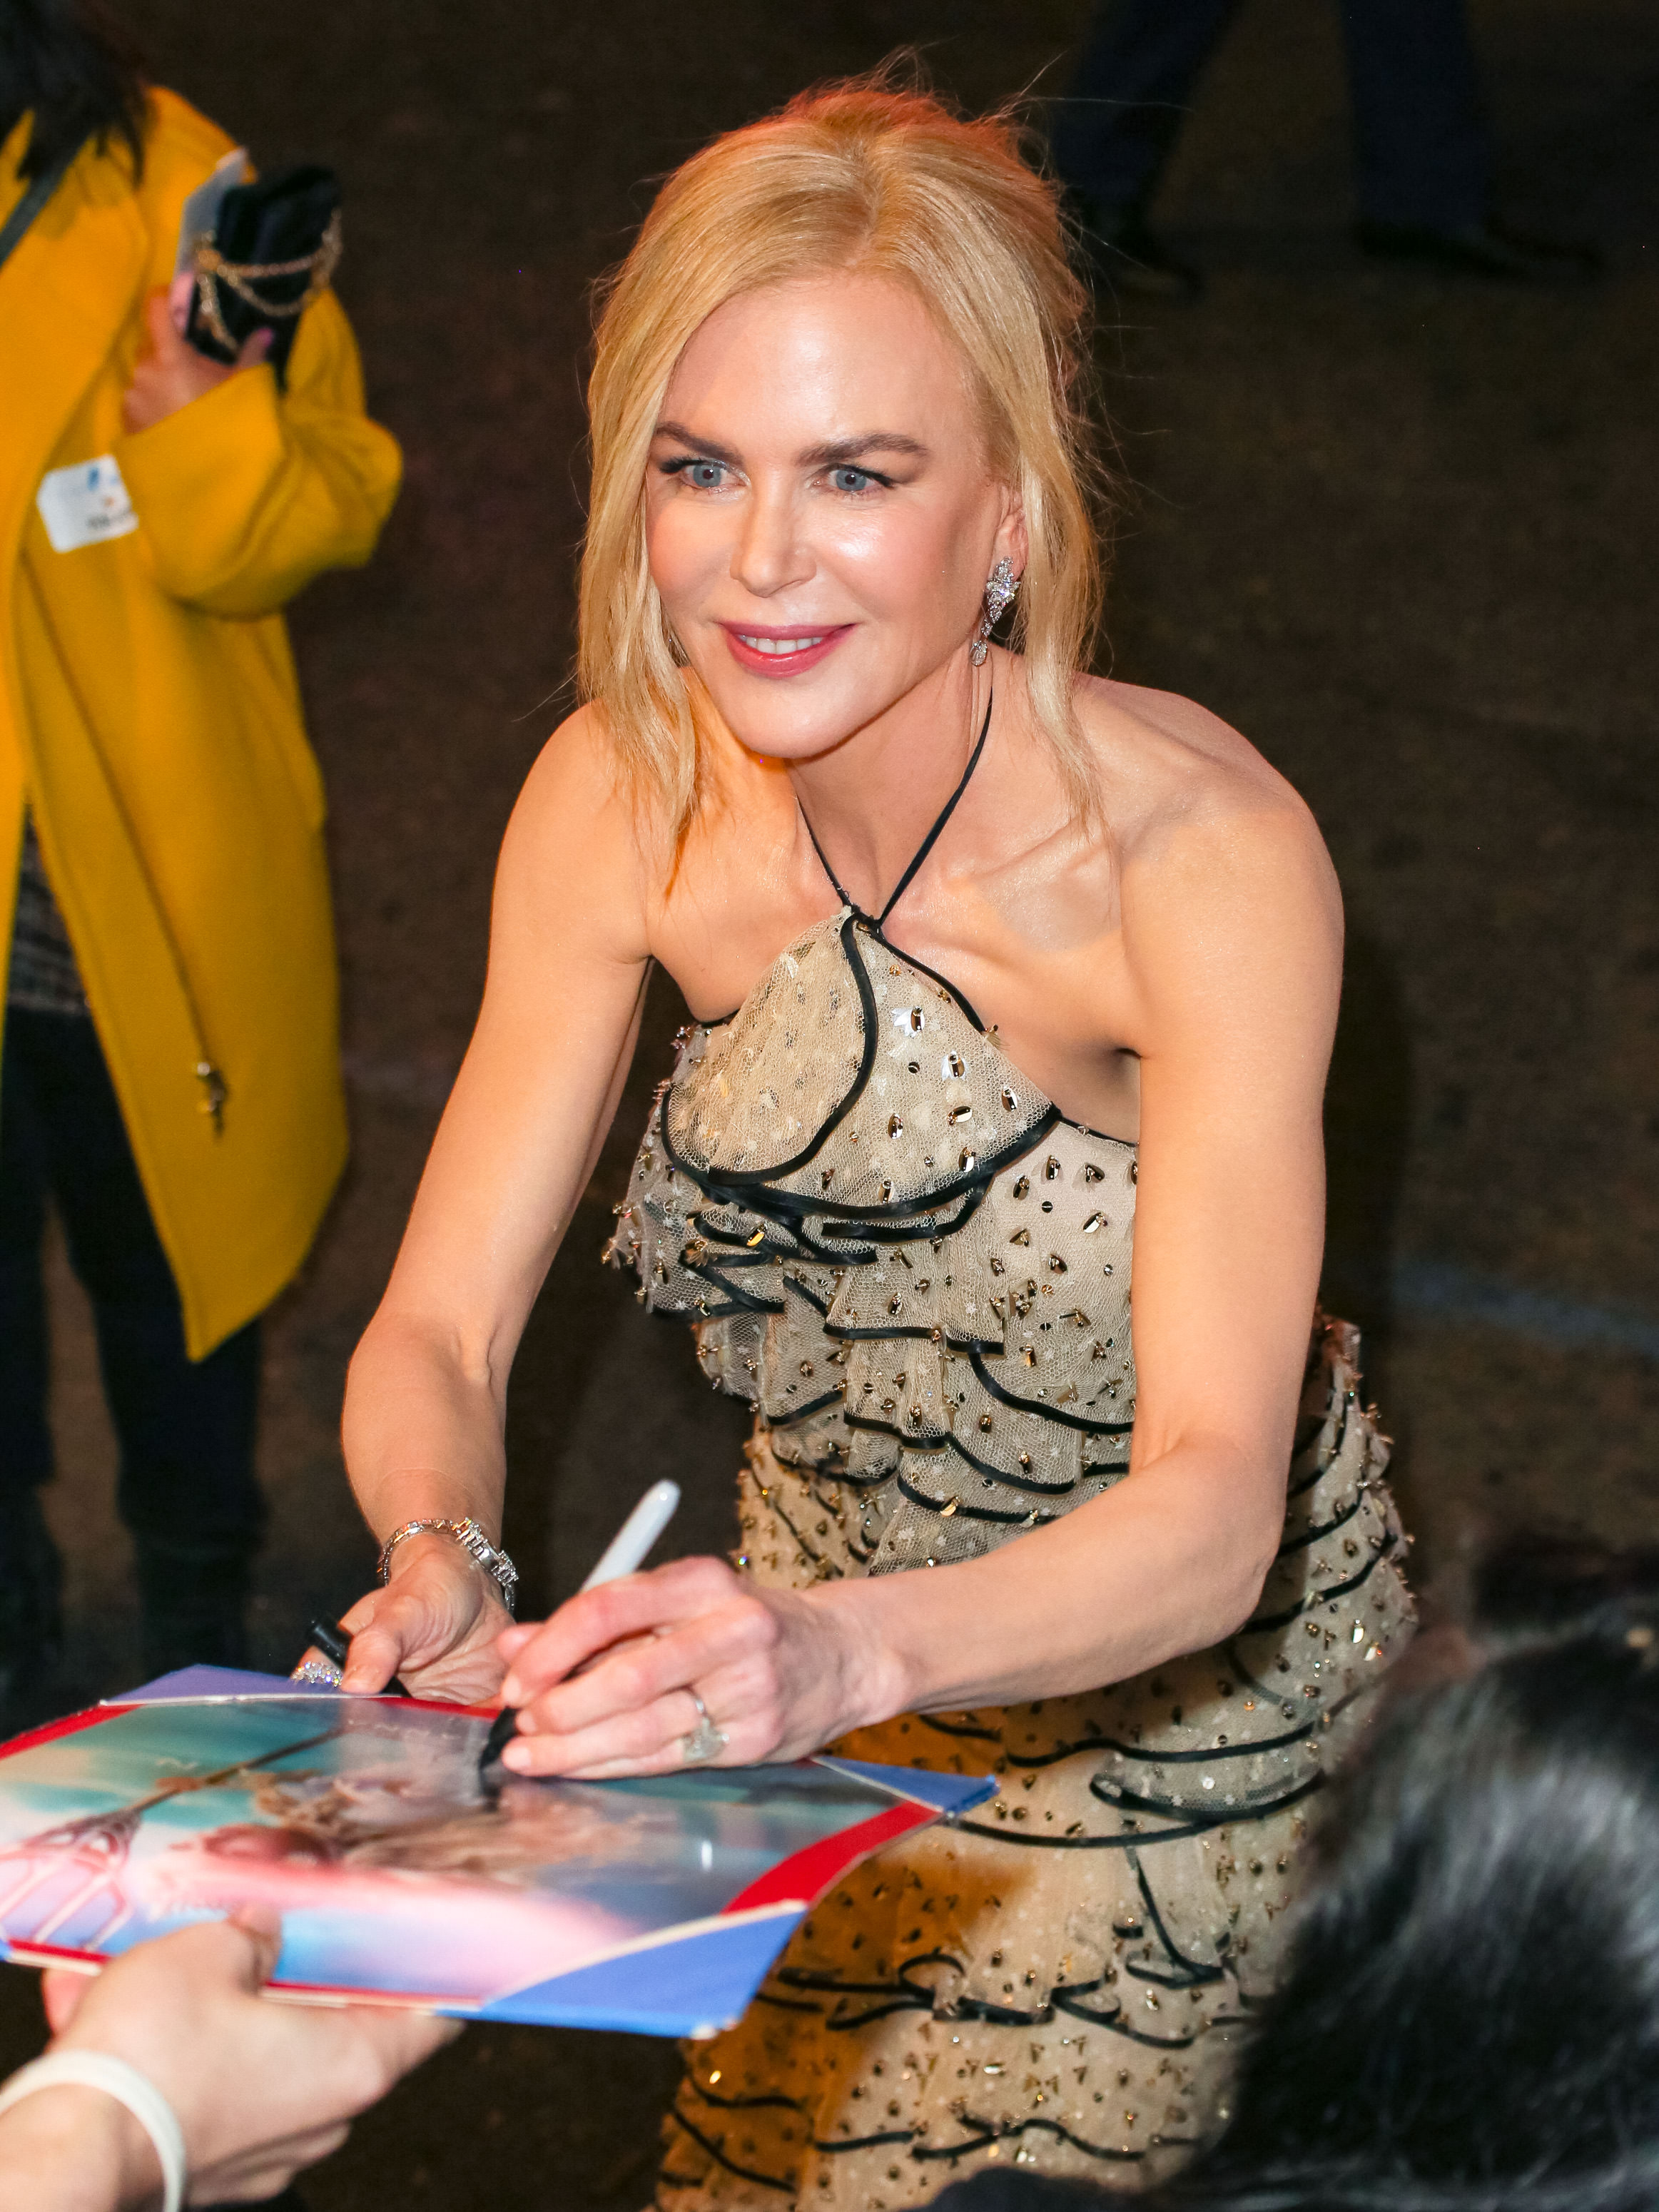 Nicole Kidman is seen arriving at the premiere of Warner Bros. Pictures' 'Aquaman' at the Chinese Theatre in Los Angeles, California, on December 12, 2018. | Source: Getty Images